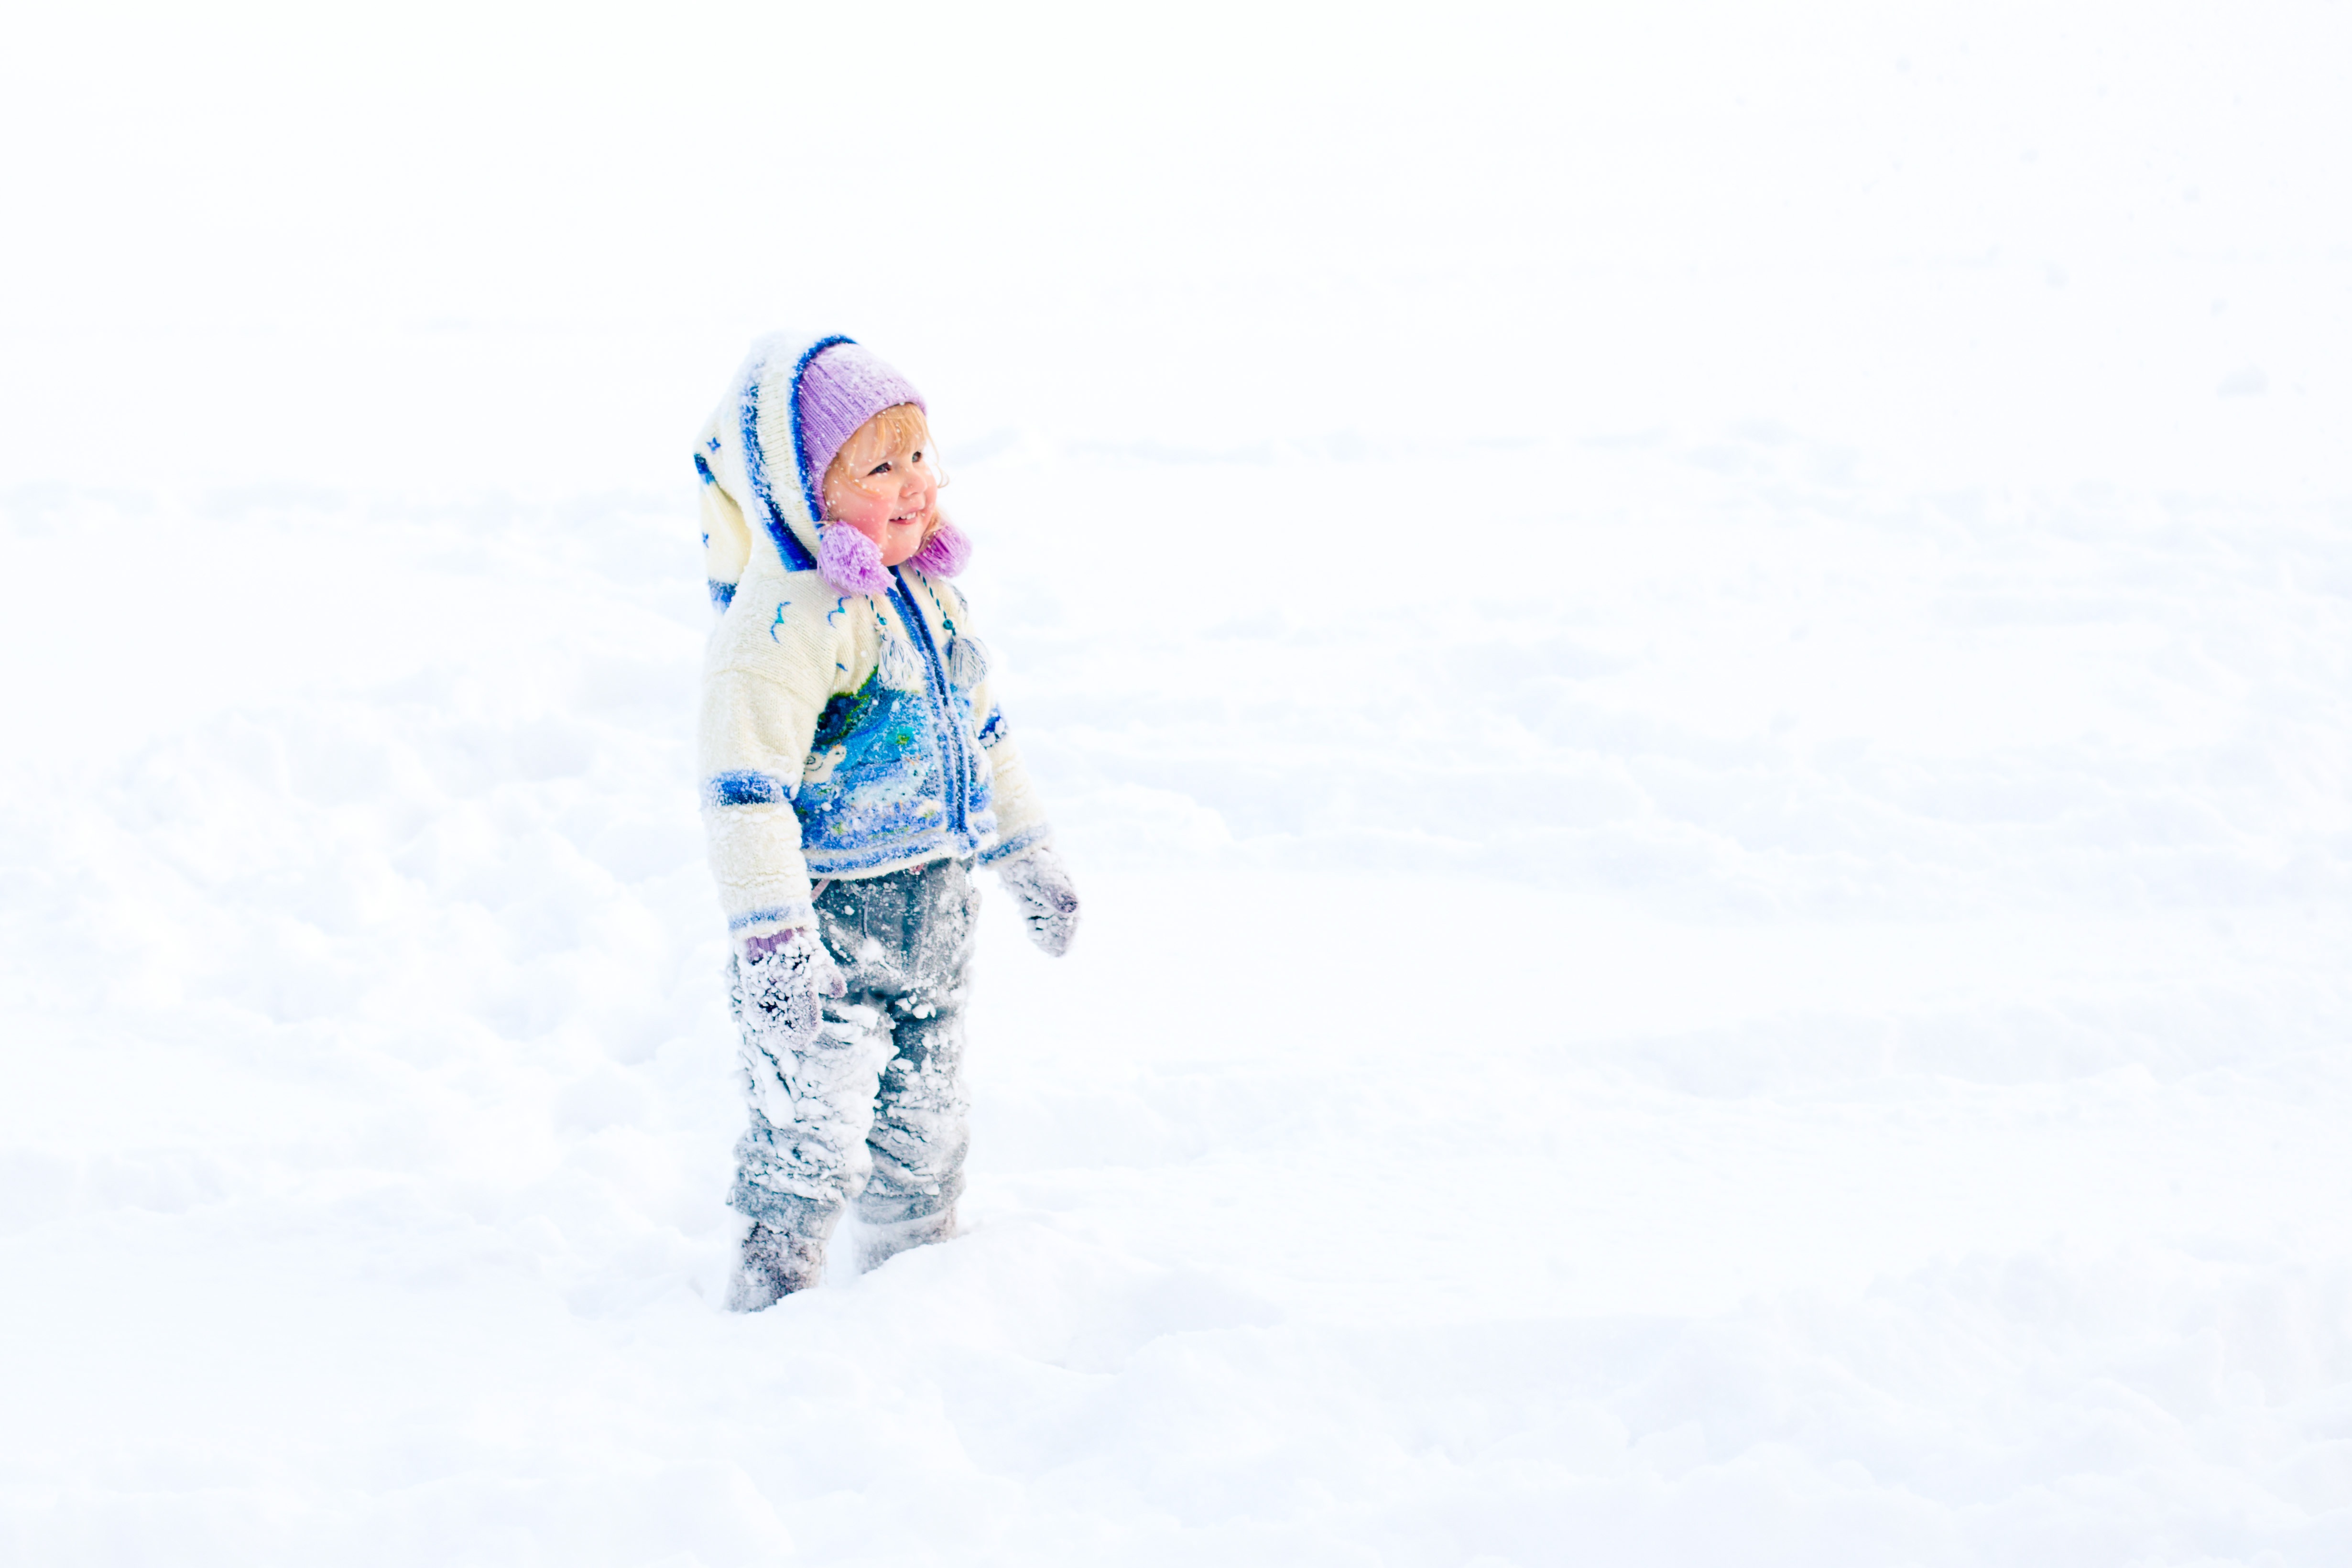 Child playing in winter photo